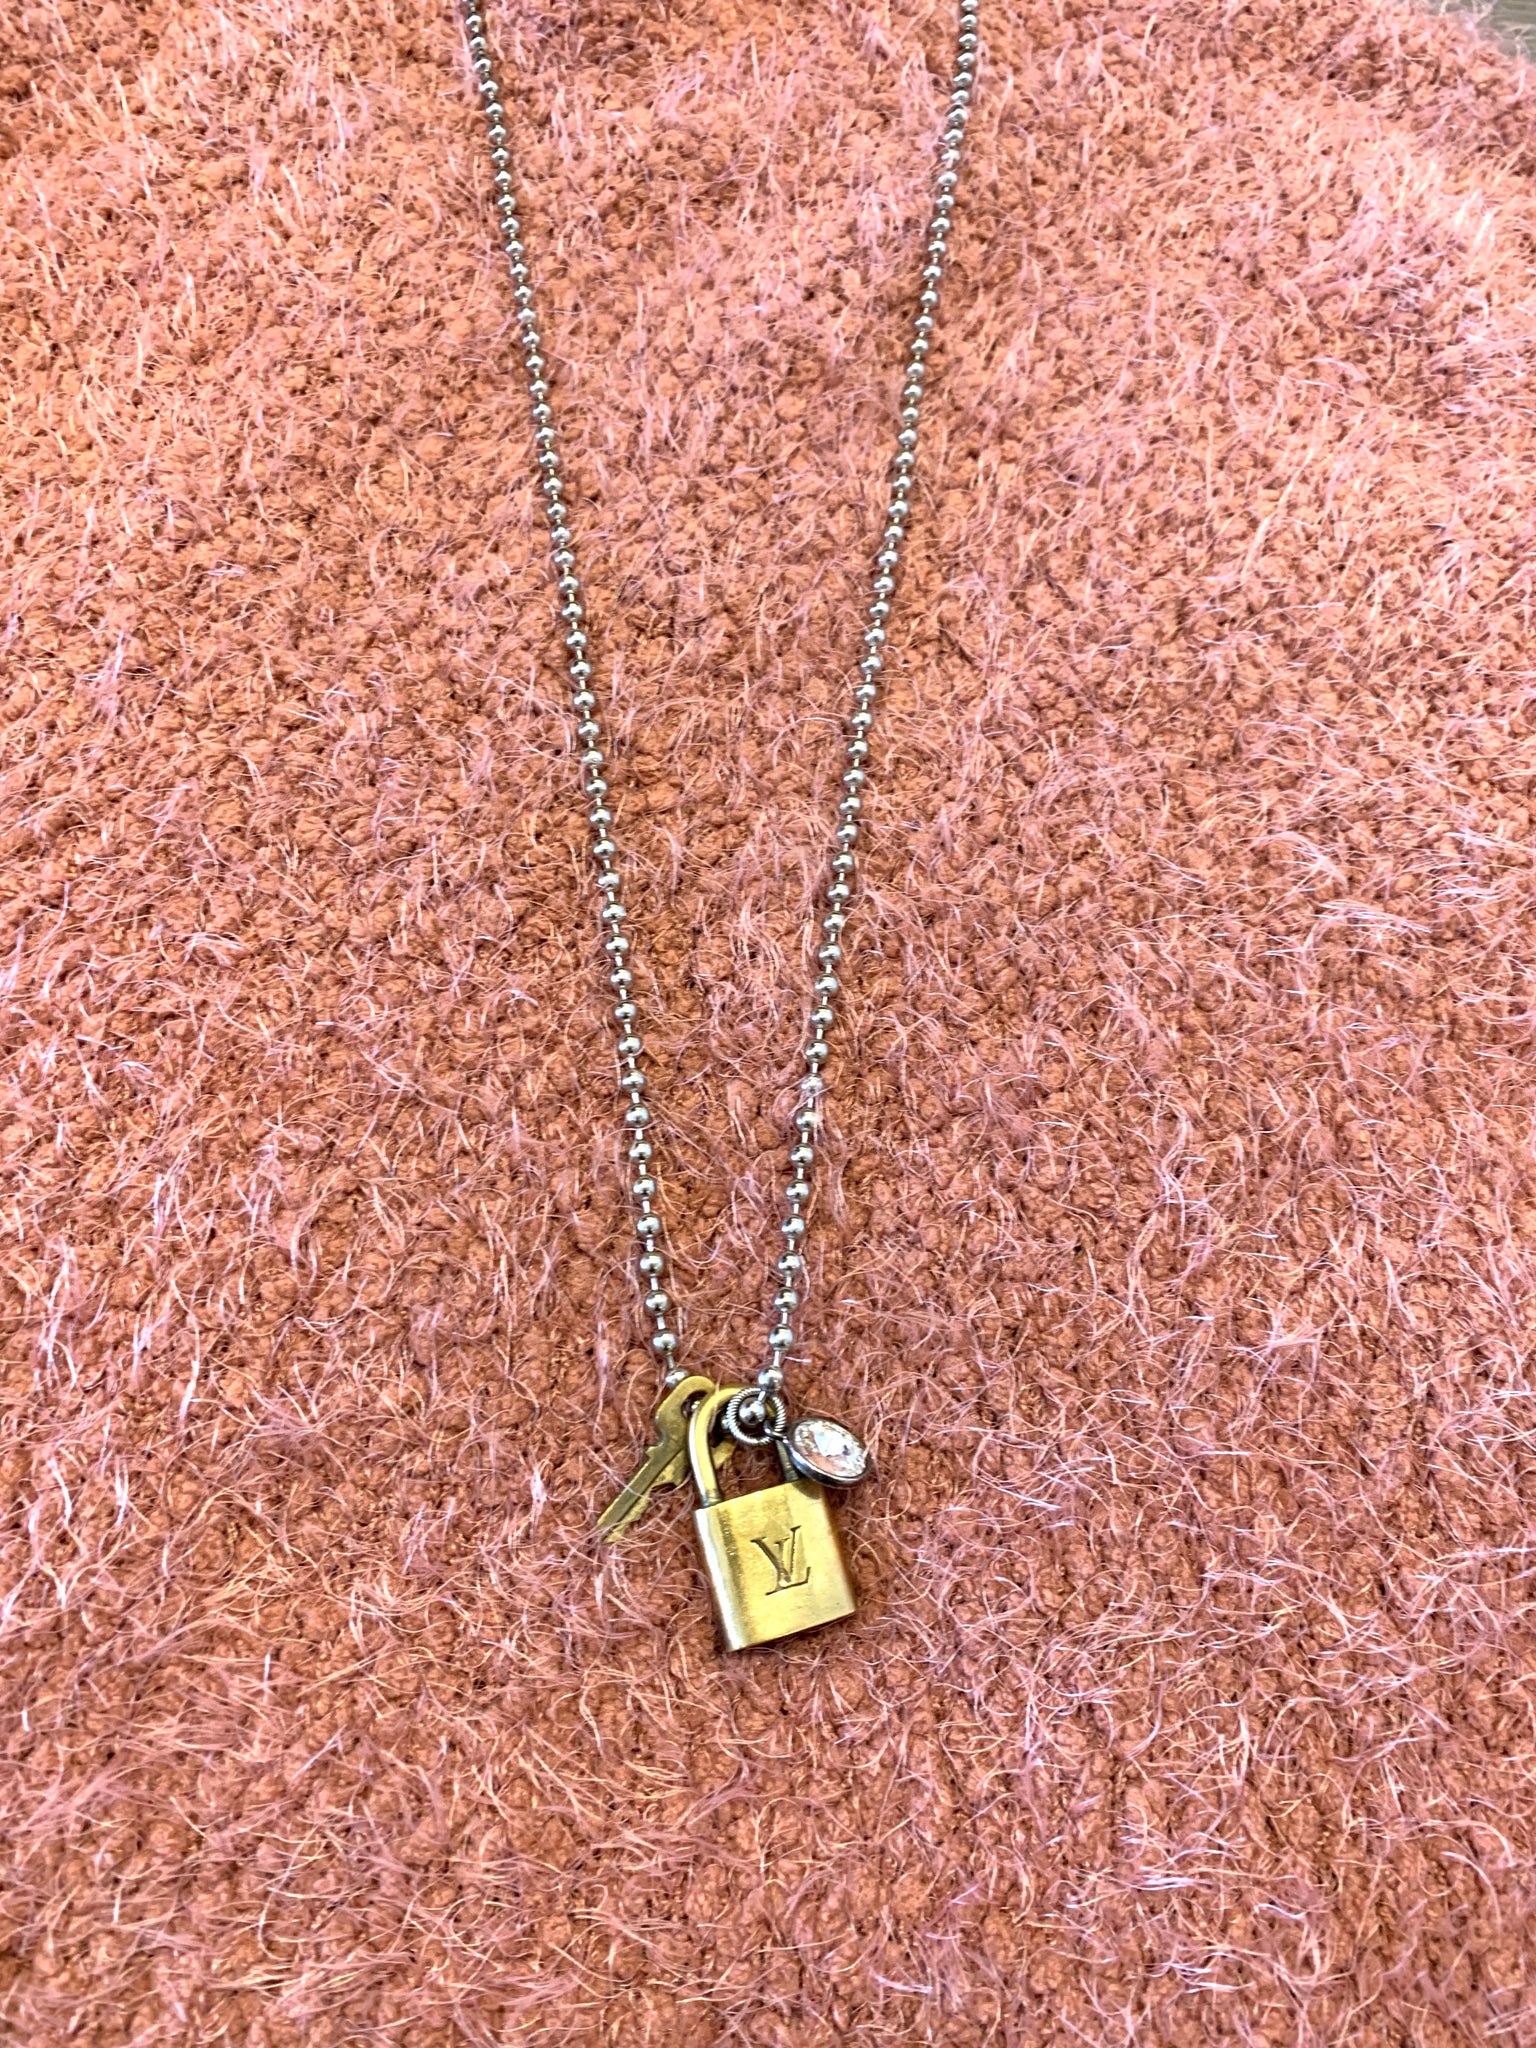 vuitton dog tag necklace gold